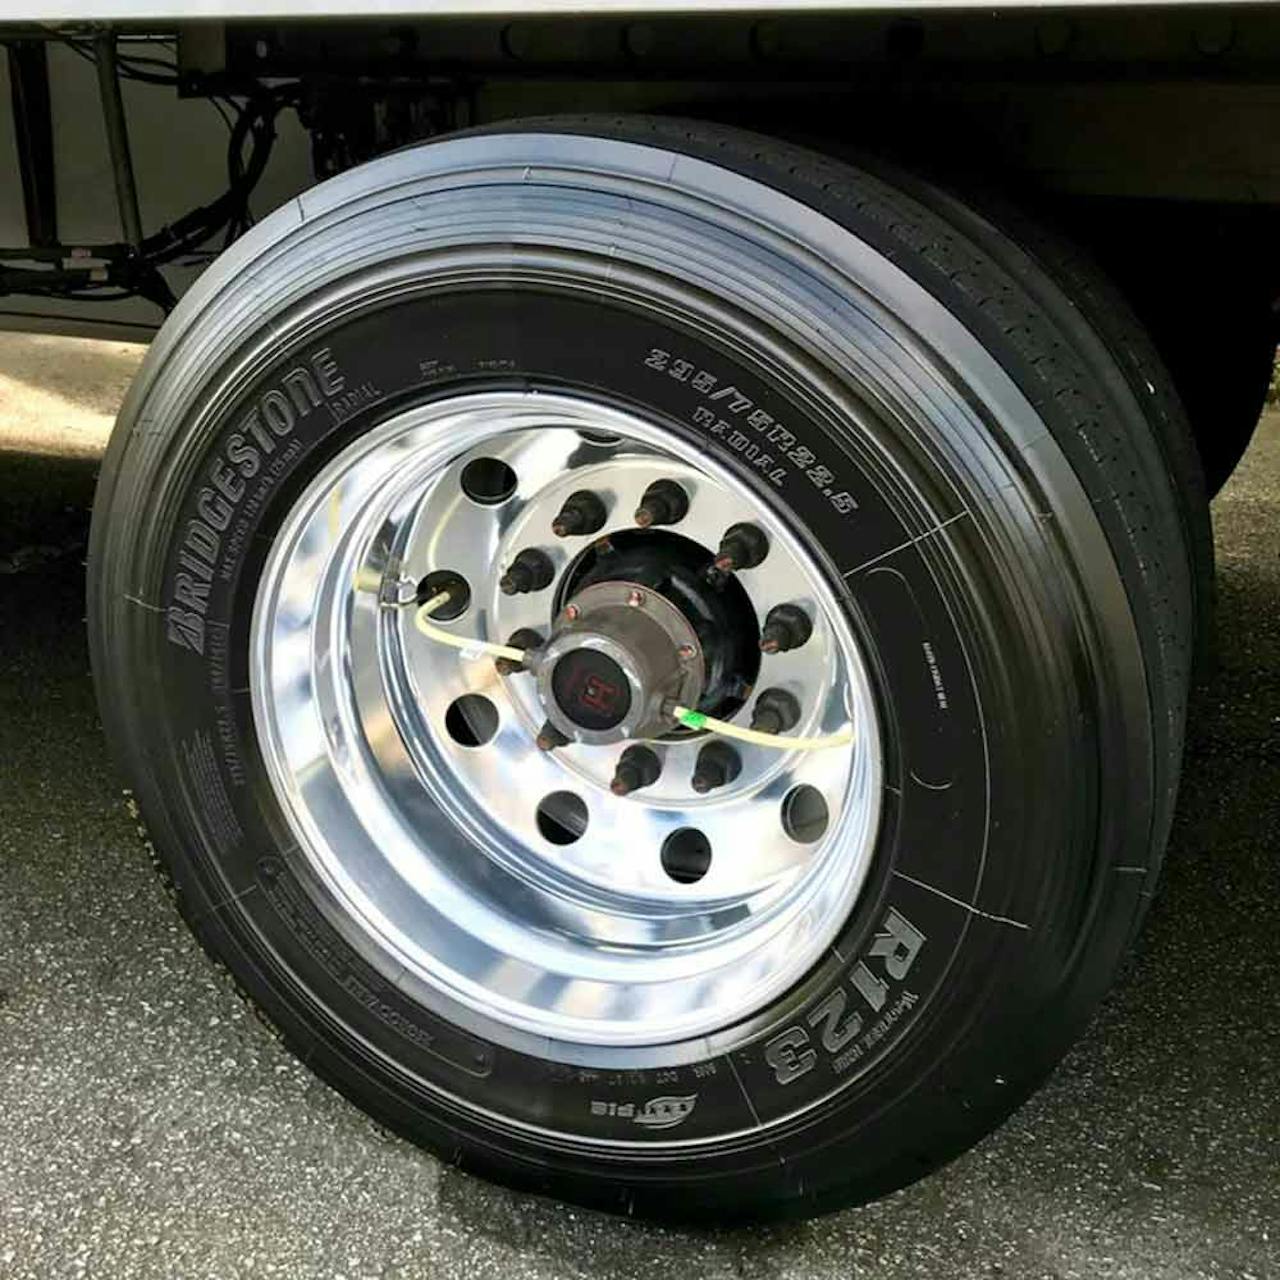 AA 5 Gal High Gloss Tire Shine, Solvent-Based